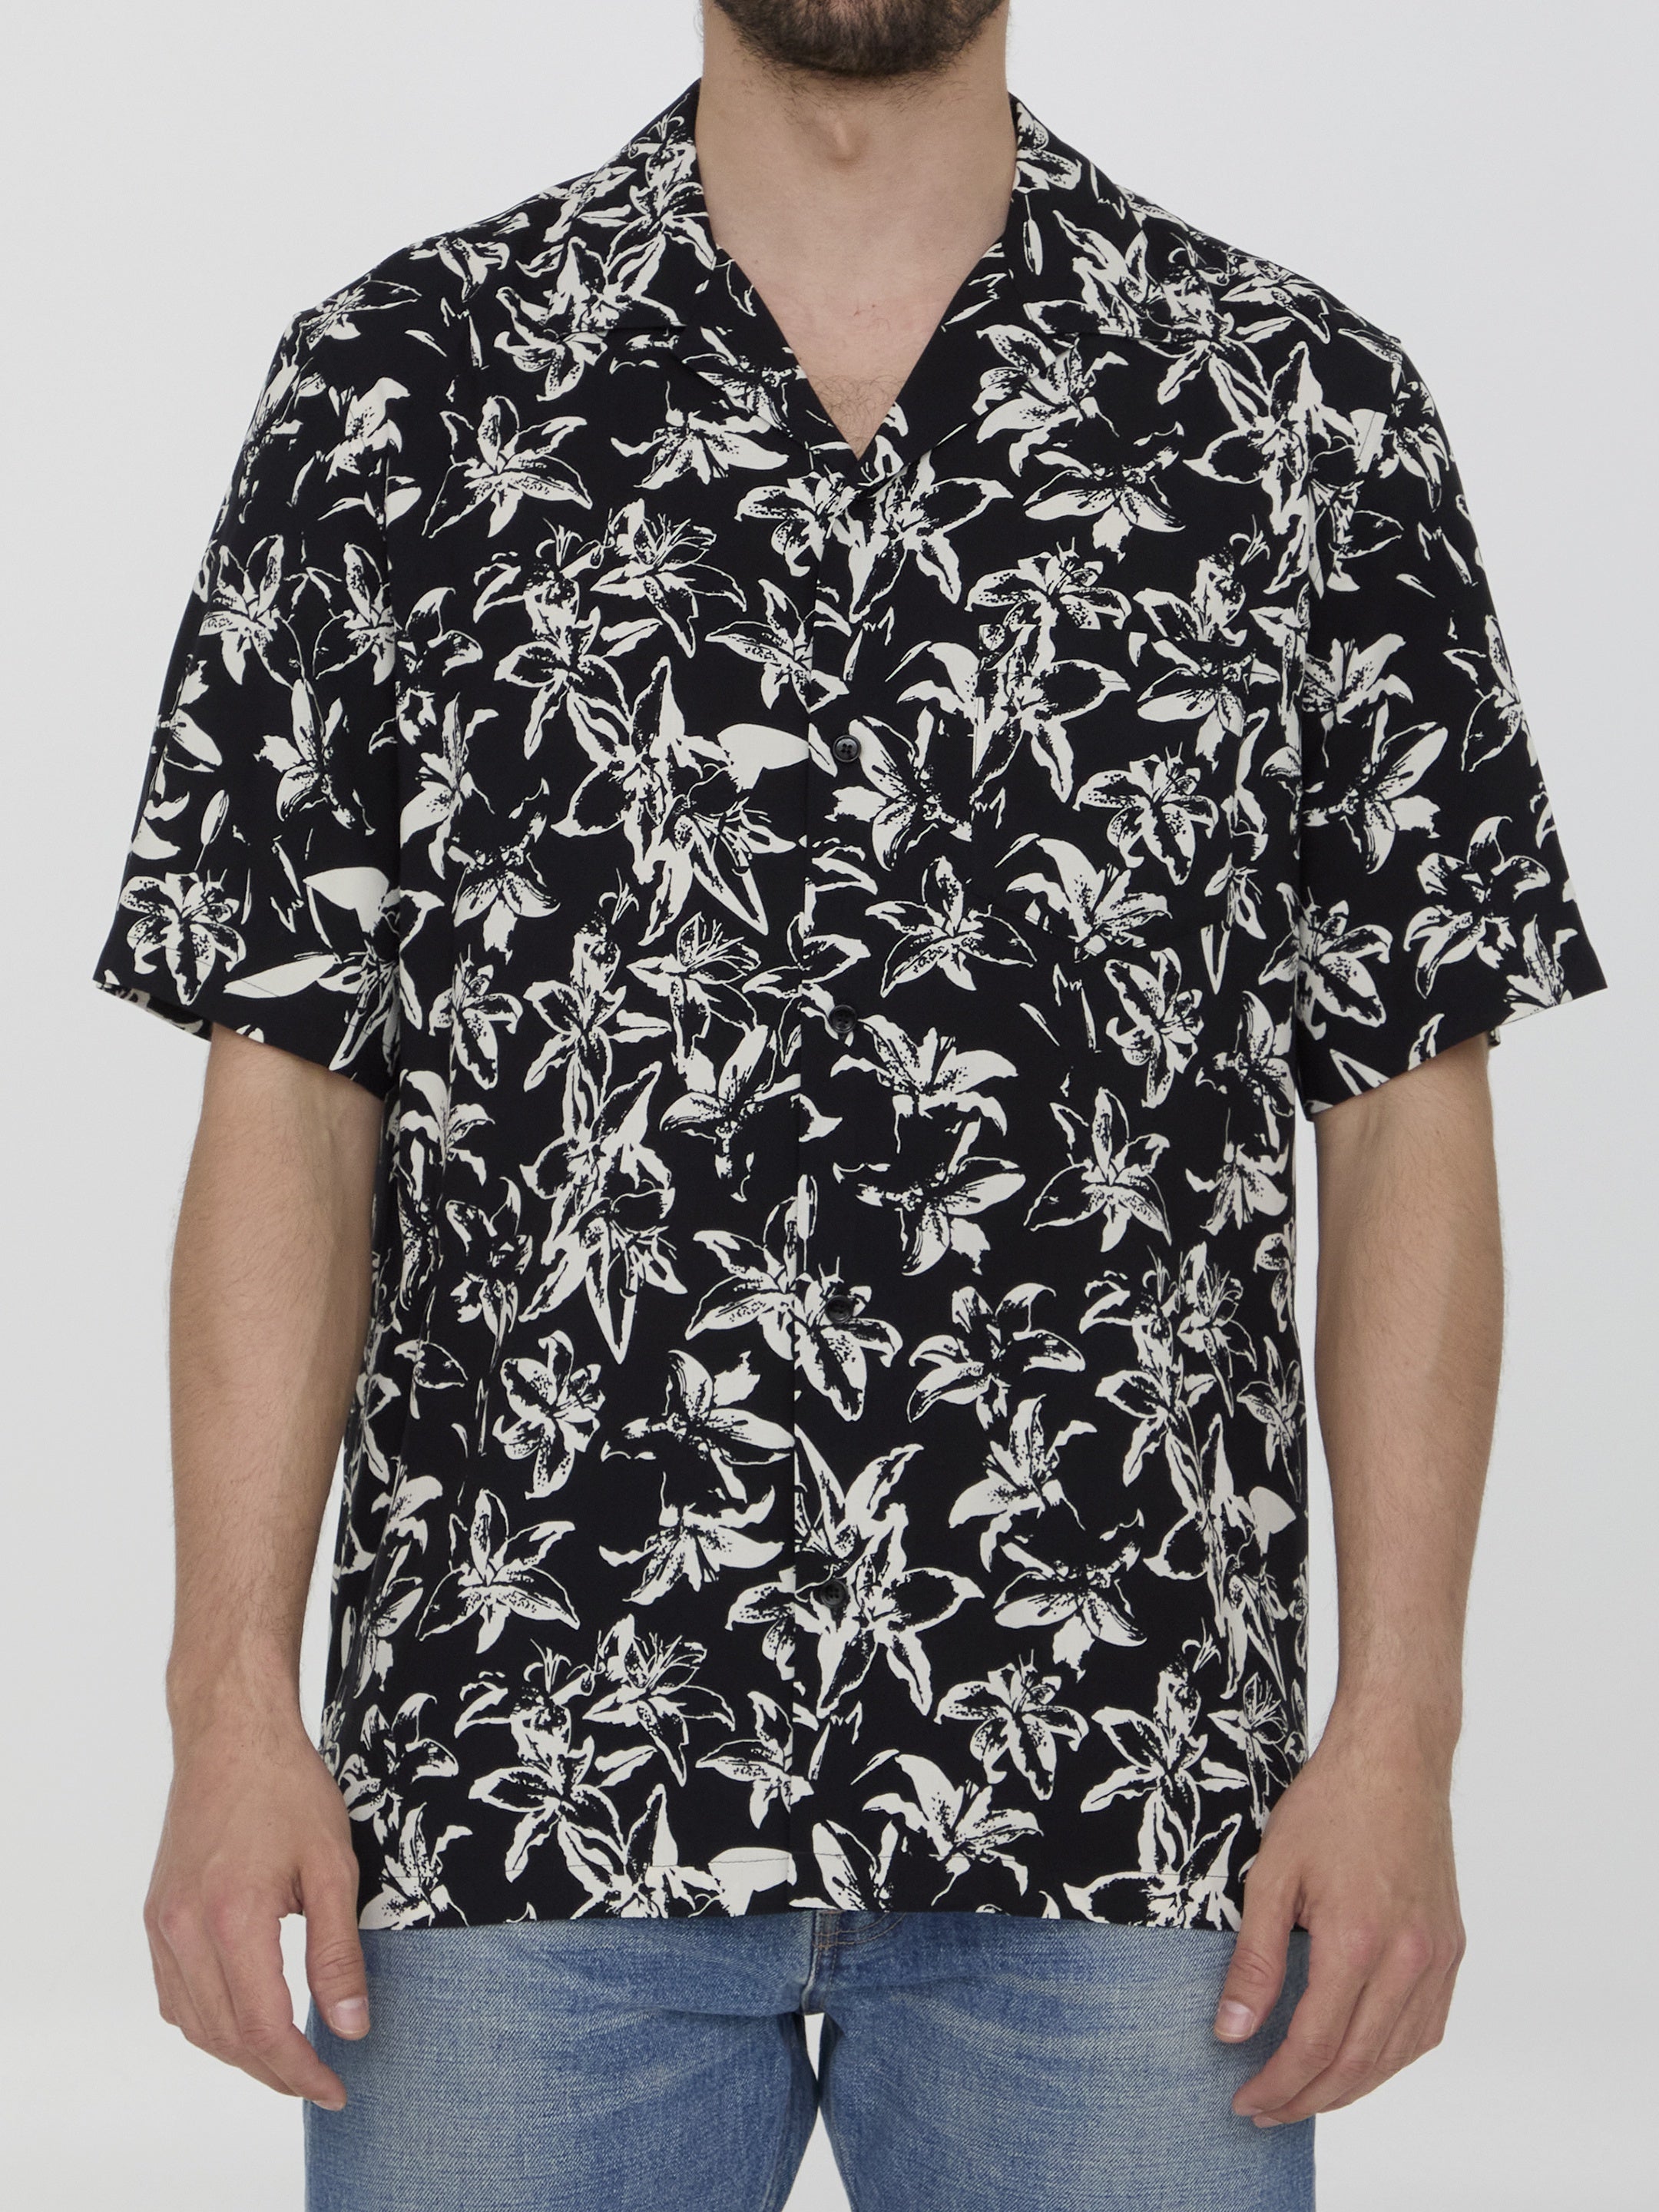 CELINE-OUTLET-SALE-Hawaiian-shirt-Shirts-38-BLACK-ARCHIVE-COLLECTION.jpg